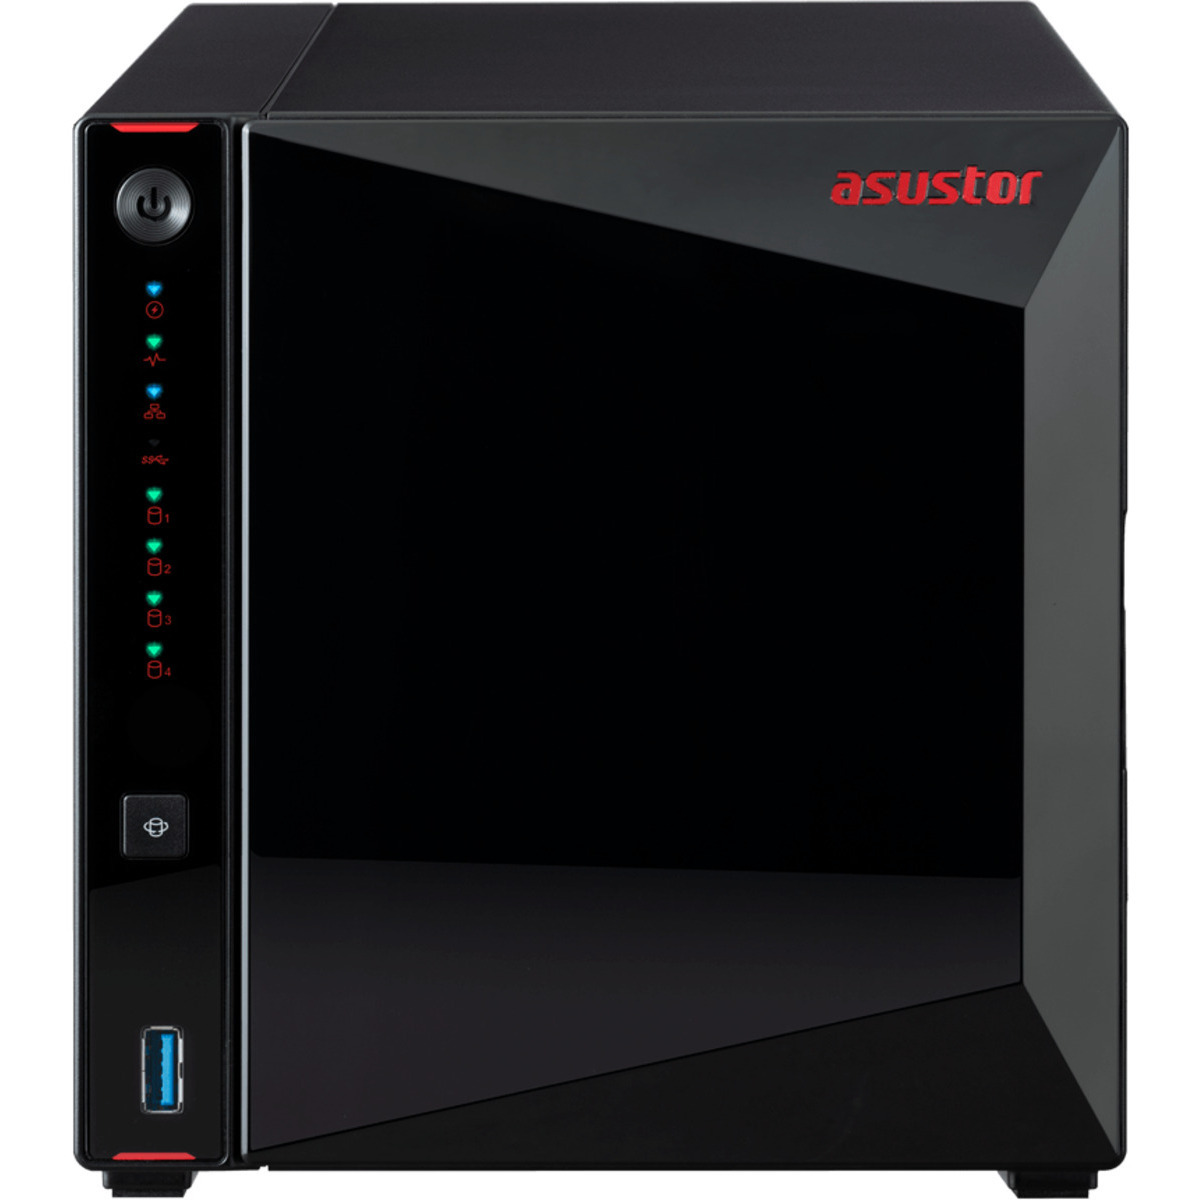 ASUSTOR AS5304T Nimbustor Desktop 4-Bay Multimedia / Power User / Business NAS - Network Attached Storage Device Burn-In Tested Configurations - FREE RAM UPGRADE AS5304T Nimbustor